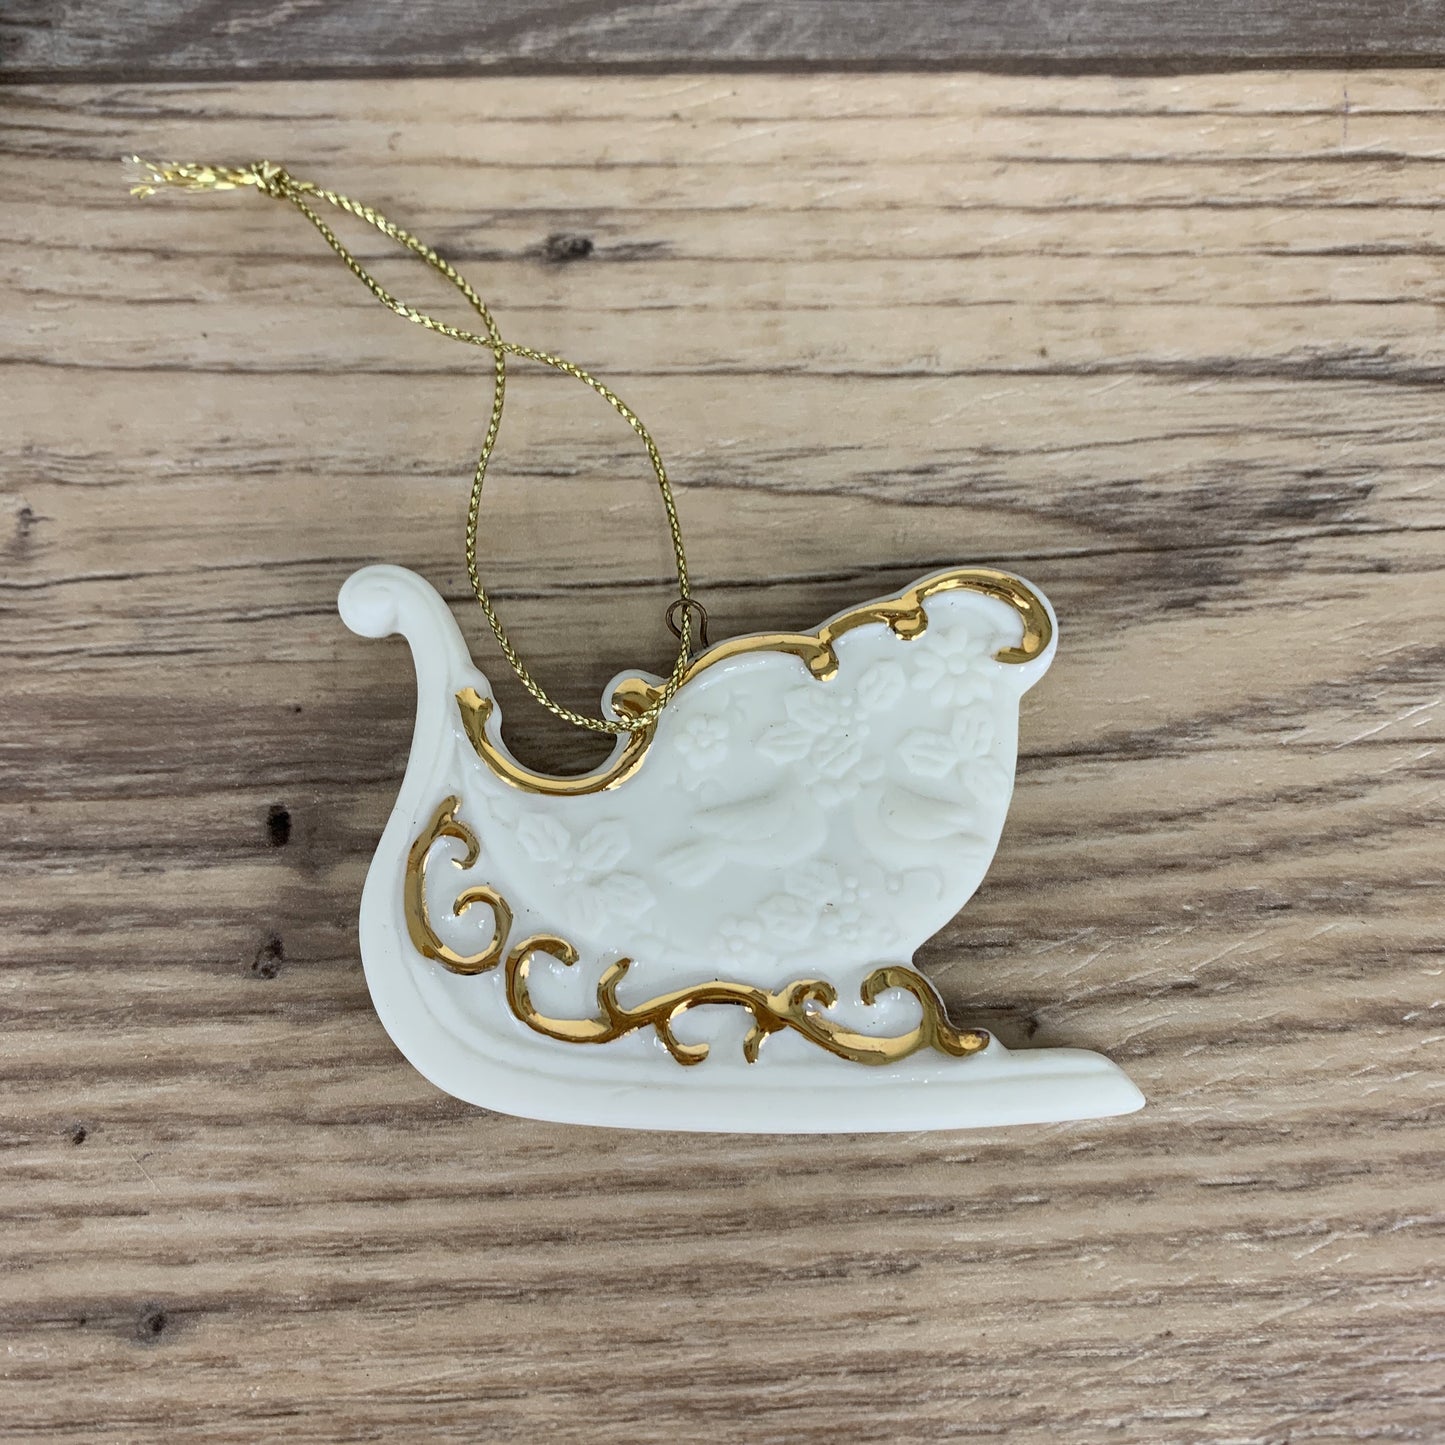 Avon Set of 3 Bisque Ornaments, Boxed Set Wreath, Angel, Sleigh White Porcelain with Gold Trim